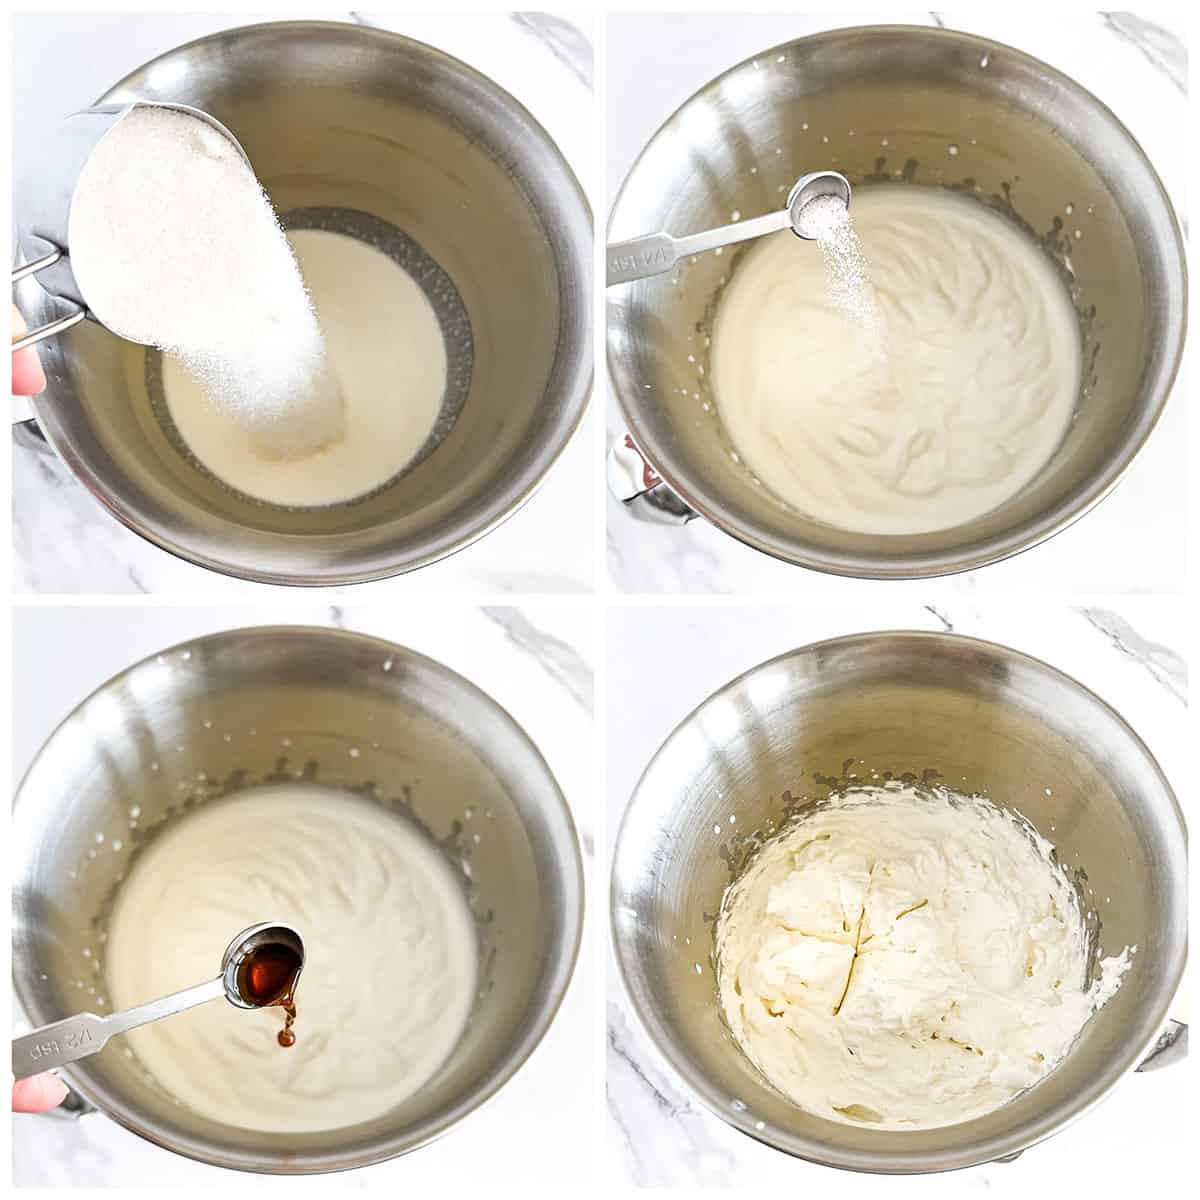 Beat cream and sugar together just until it thickens and the whipped cream starts to form soft peaks. Add sea salt and vanilla extract and beat for a few more seconds. 